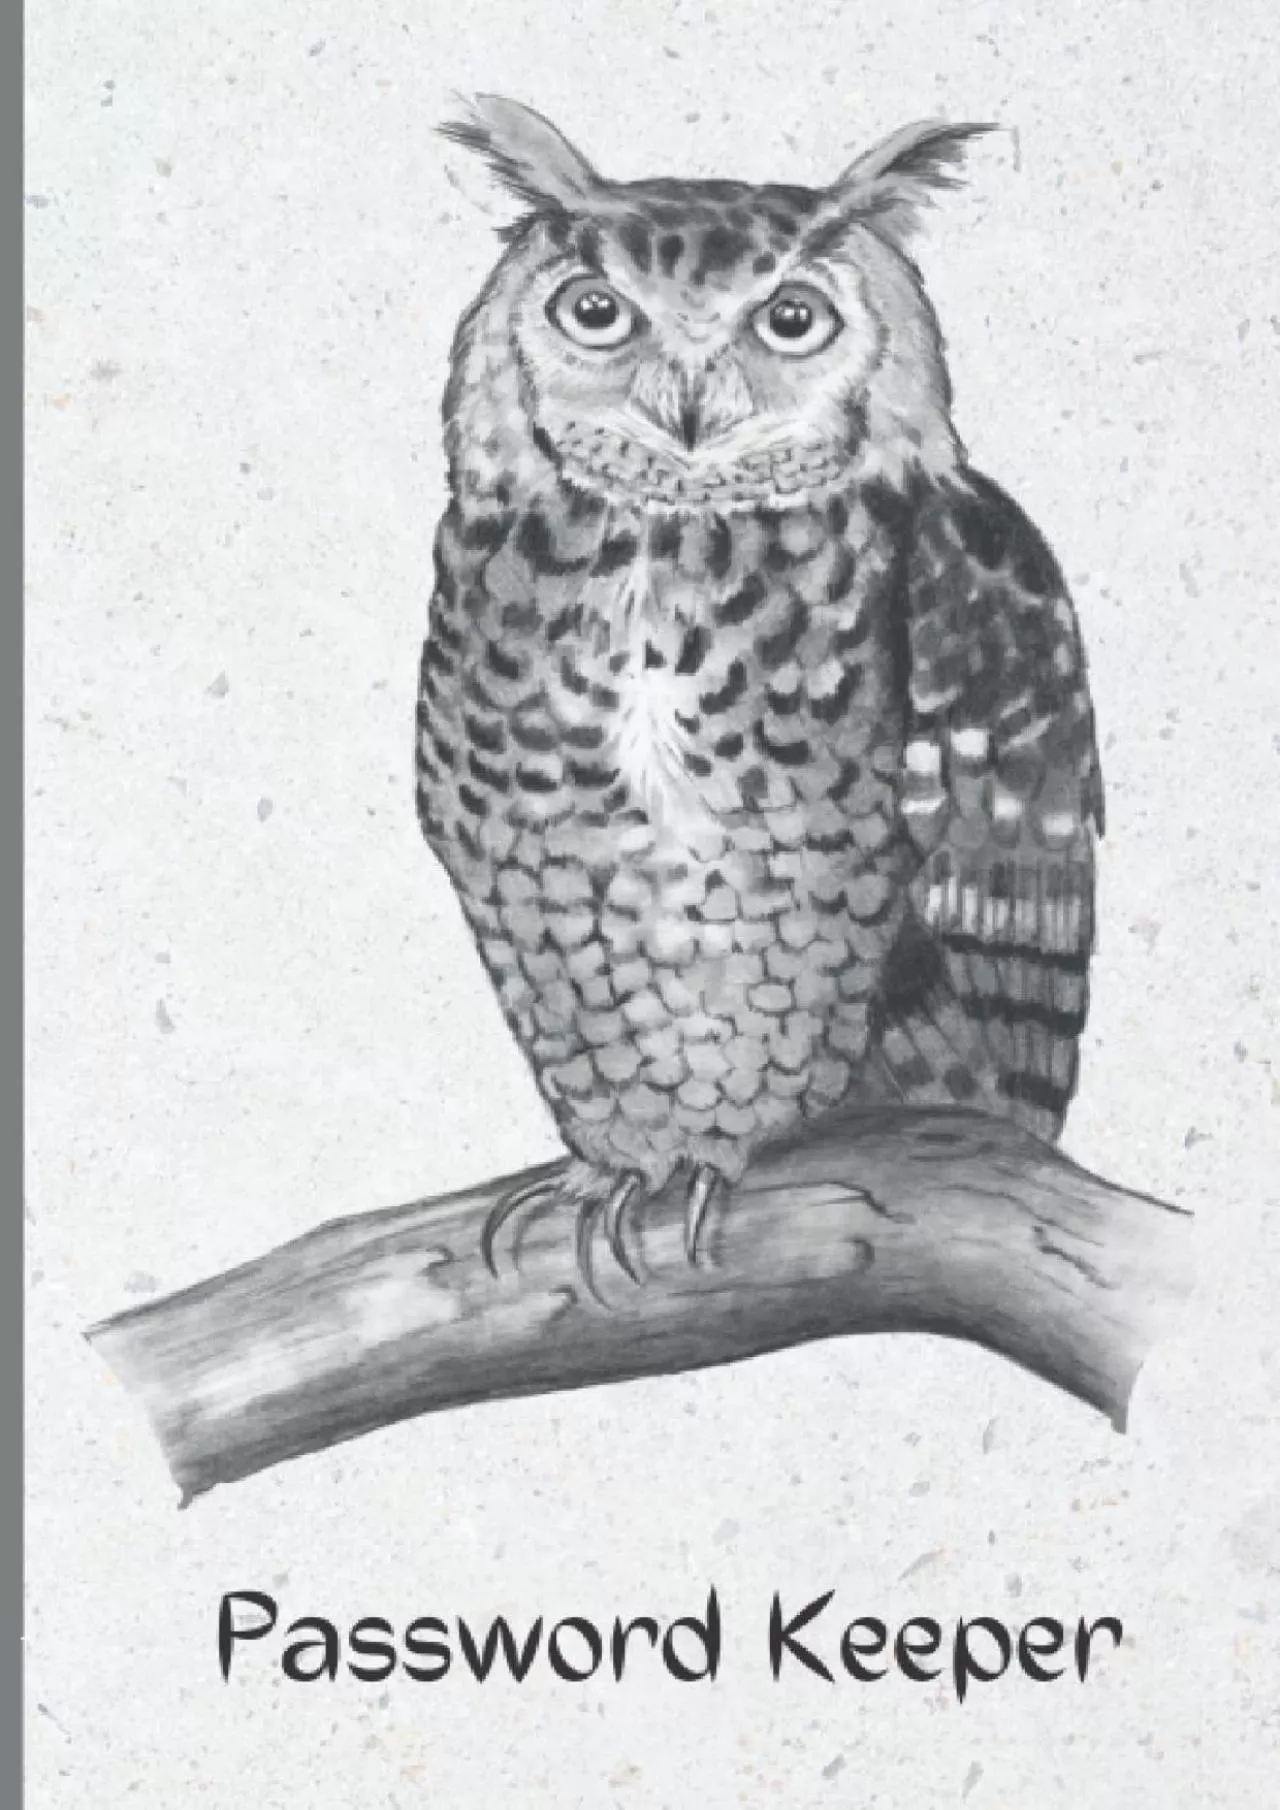 [BEST]-Password Keeper with Secretive Owl: A Book for Keeping Track of All Your Passwords